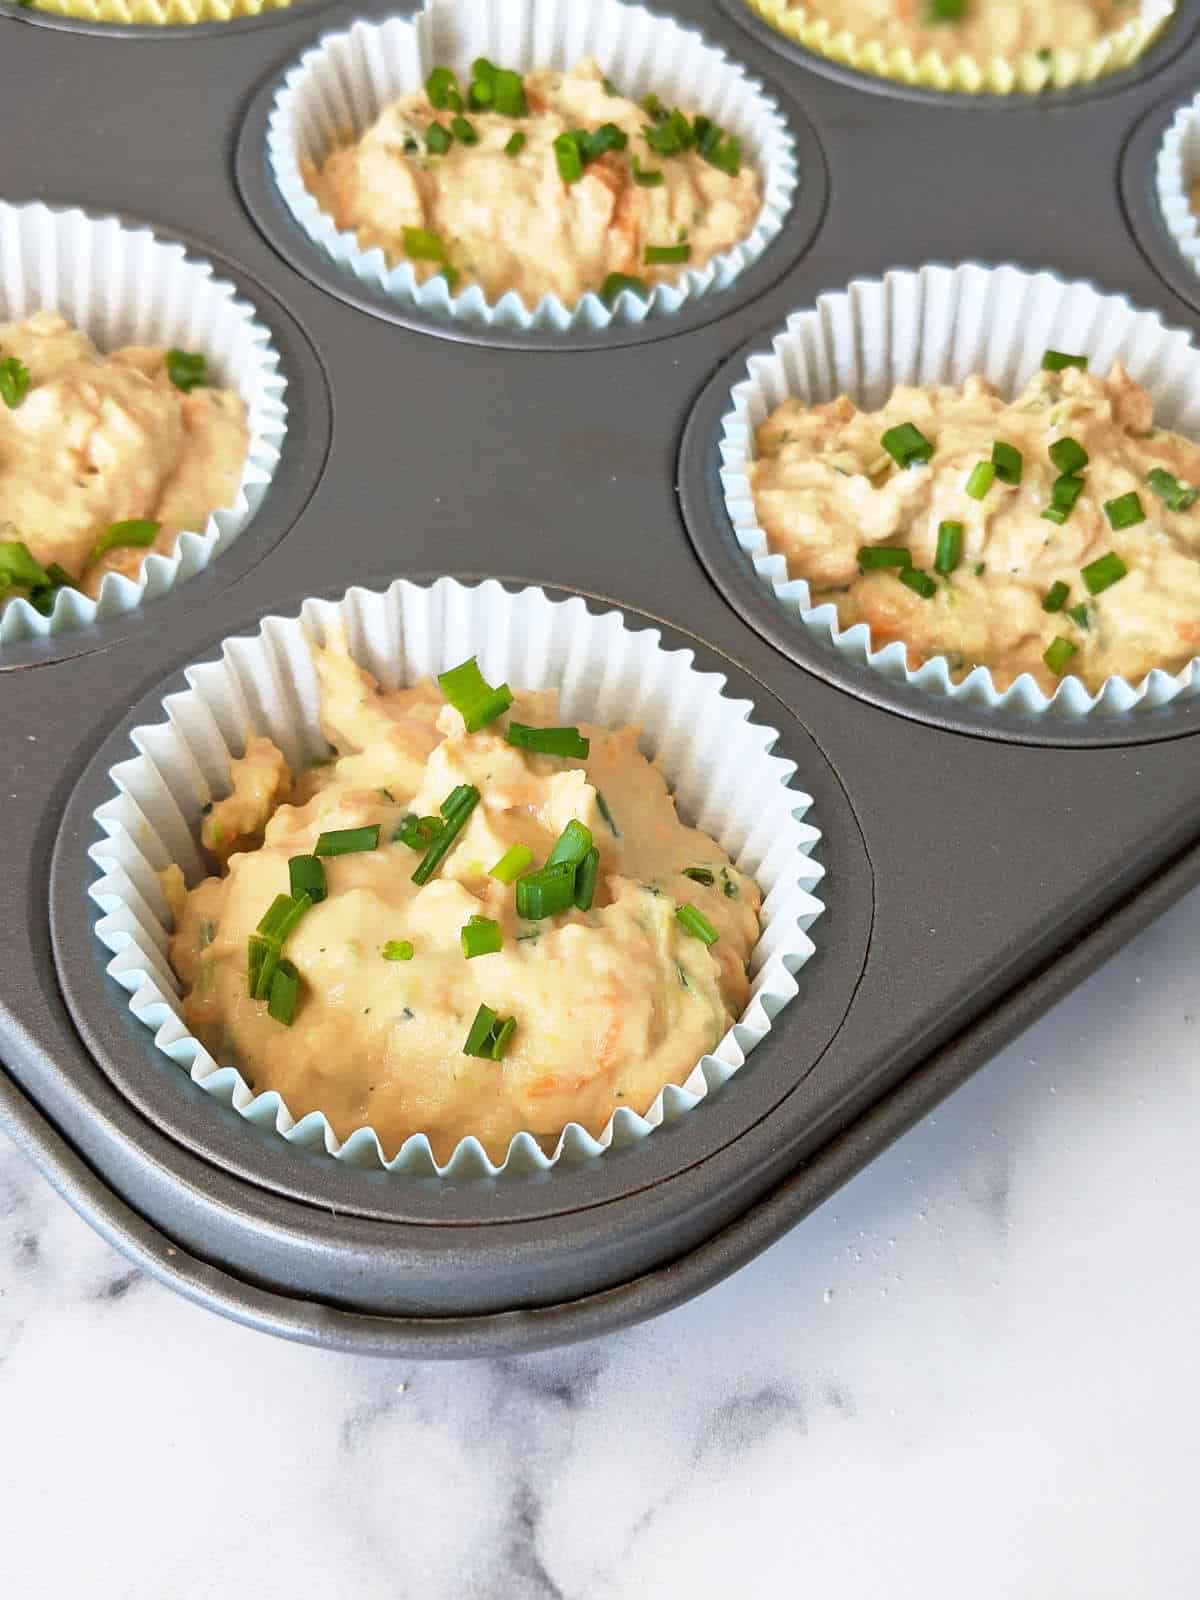 Savory muffin batter prepared in lined muffin pan topped with chives.